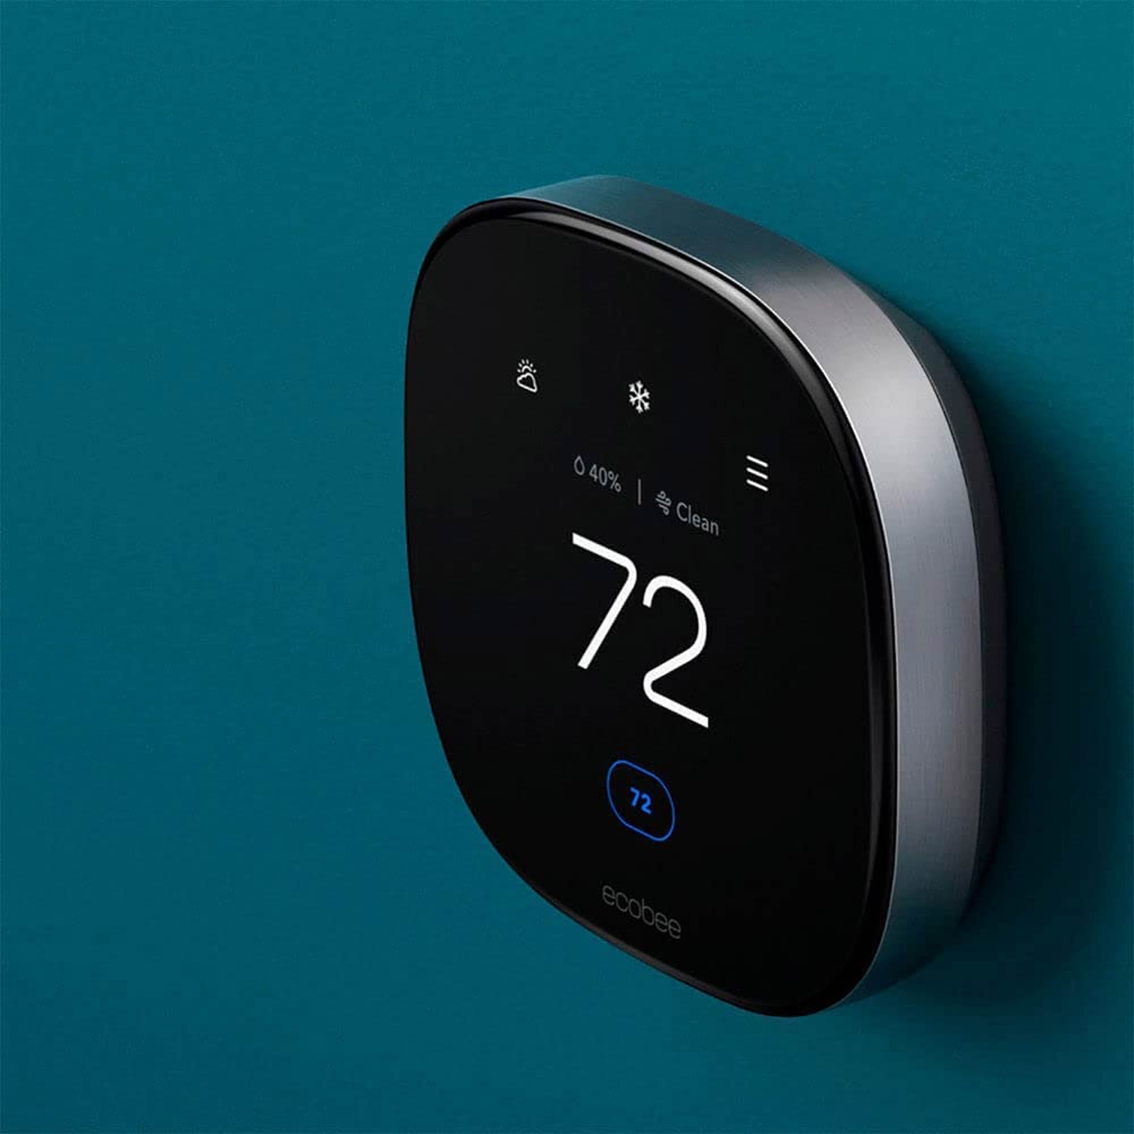 Ecobee Premium Smart Programmable Touch Screen Thermostat - Image 2 of 6